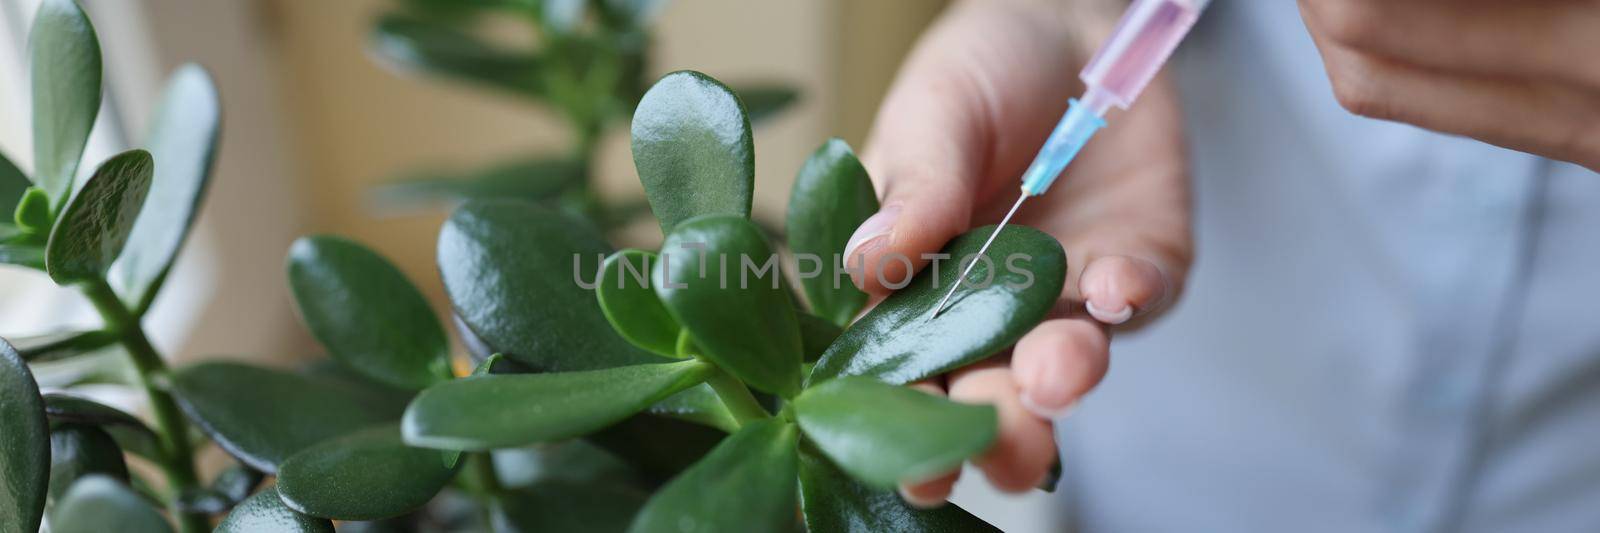 Close-up of female hands holding injection syringe with pink liquid. Woman injecting chemical substance in green leaf of plant. Genetic engineering techniques and laboratory research concept